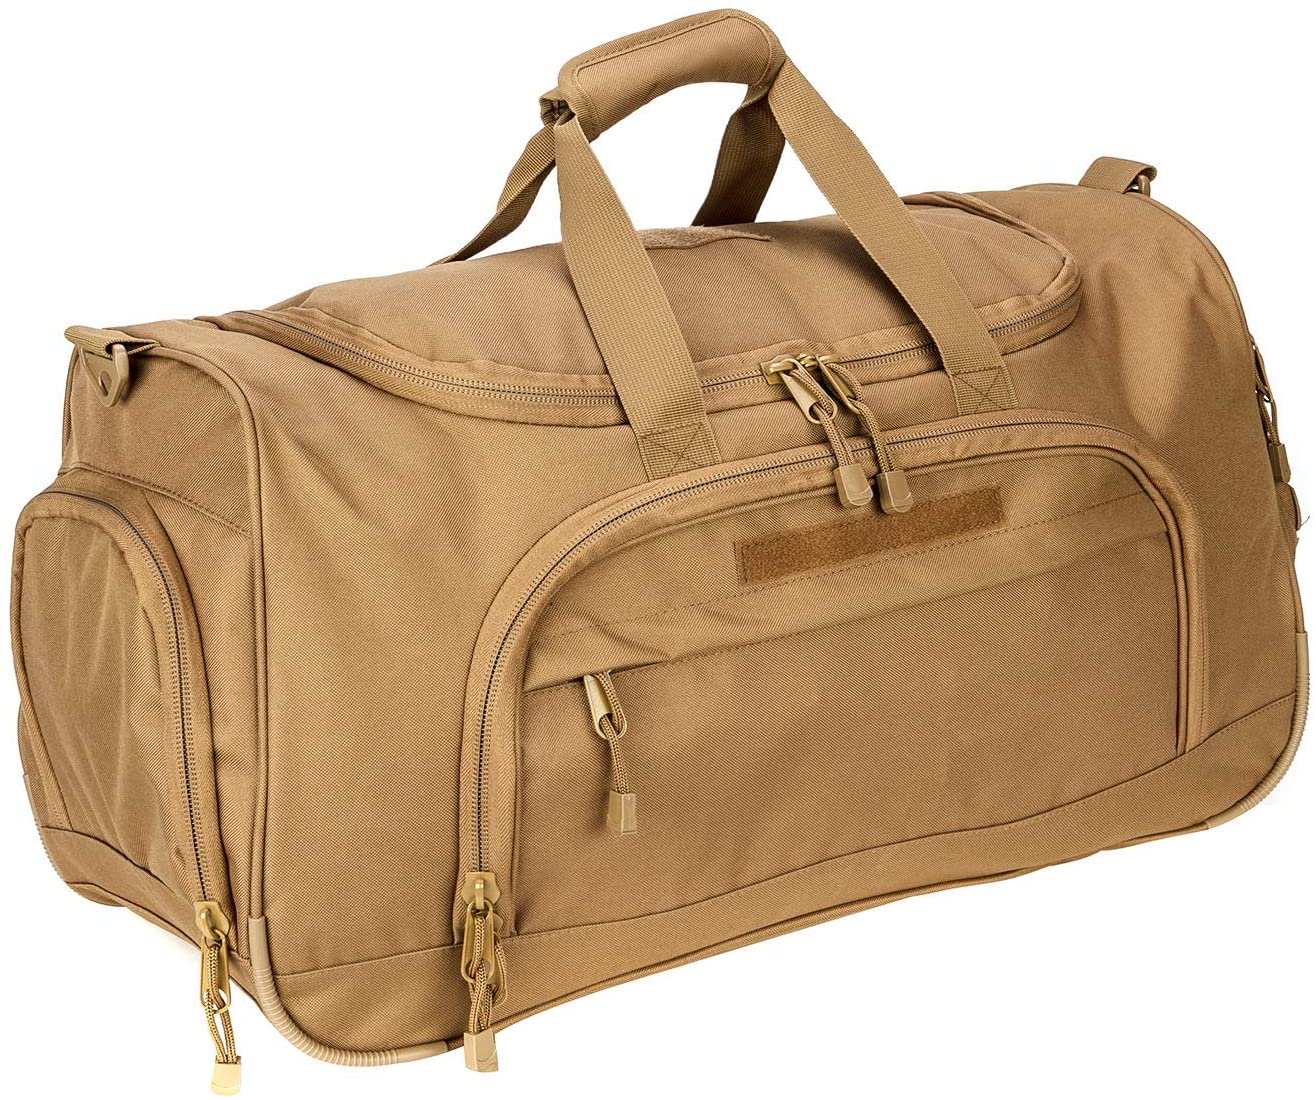 HD-3 Hunting and Tactical Duffle Bags